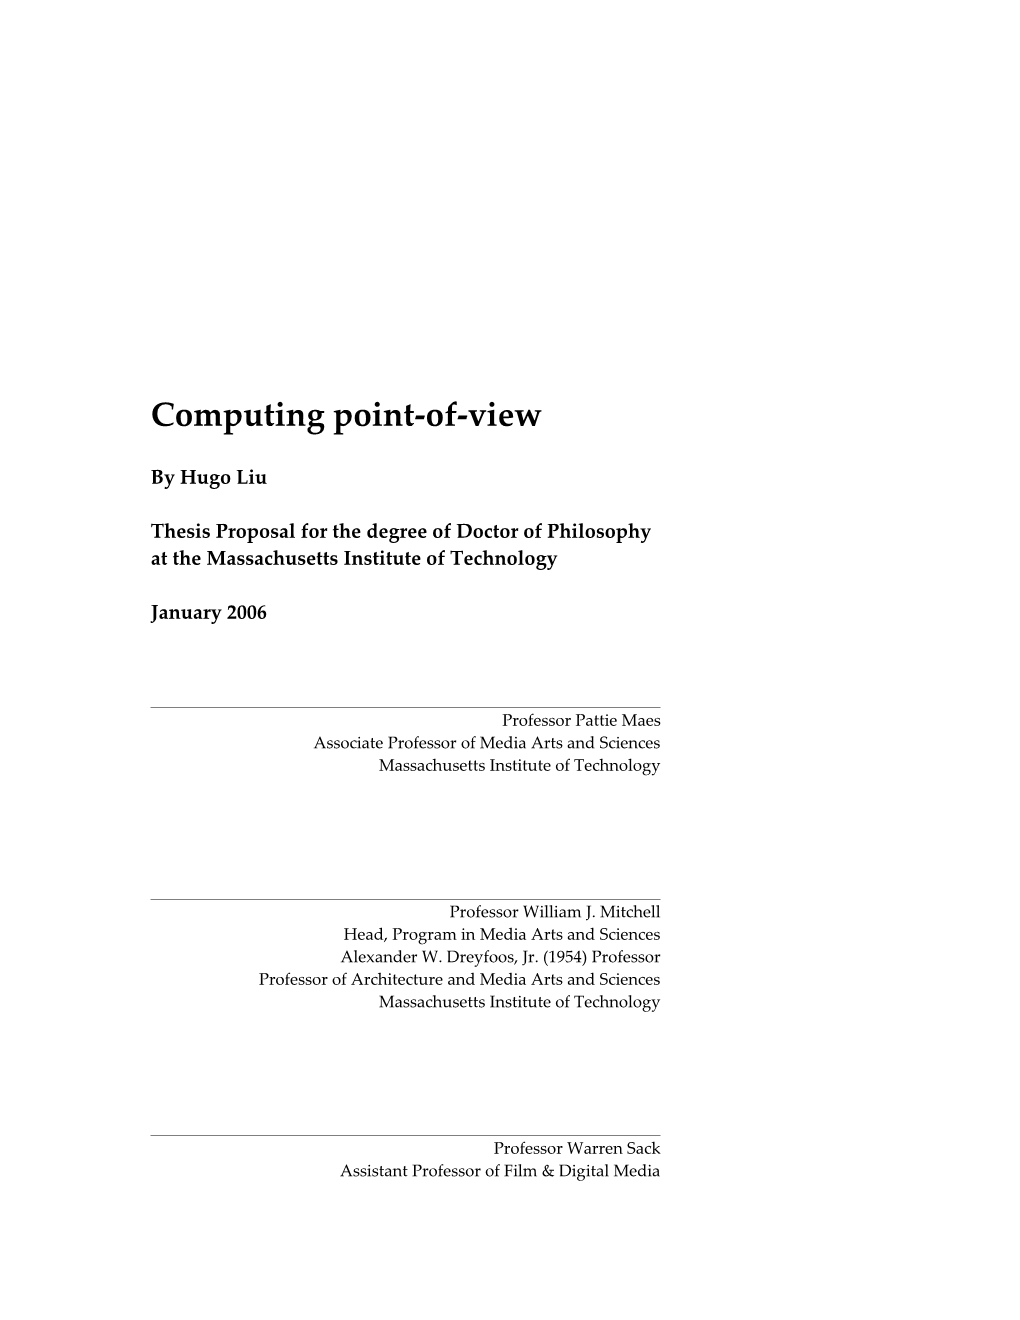 Computing Point-Of-View